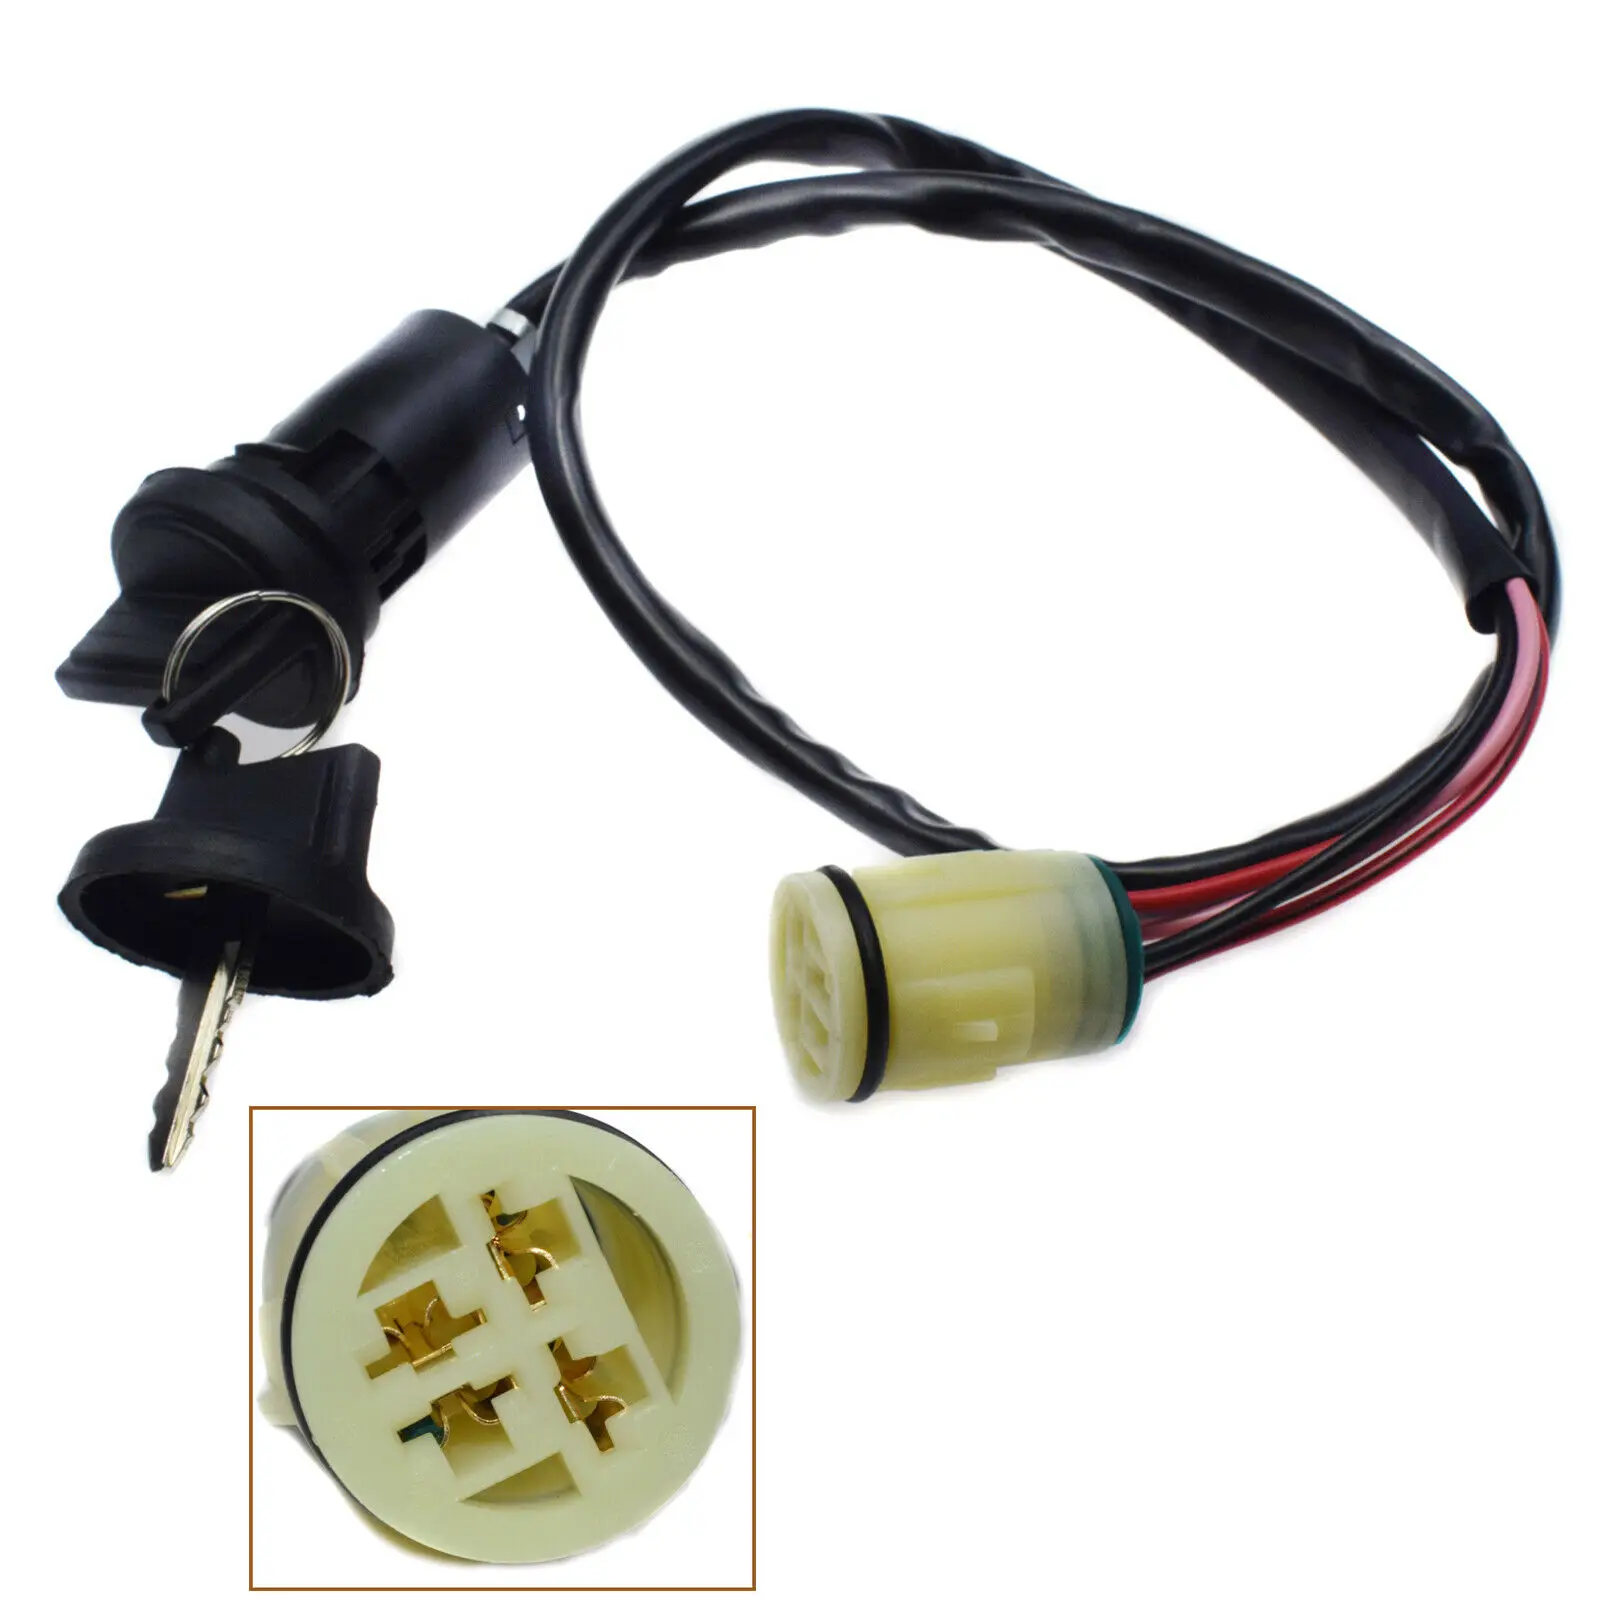 Motorcycle ATV Ignition Key Switch For Honda 15-20 Foreman 500 520 & Rancher 420 See Notes T162 Ignition Key Switch motorcycle electric door lock 4 wires plug ignition key switch for honda trx420fe trx420fpe trx420fpm trx420te trx450es rancher